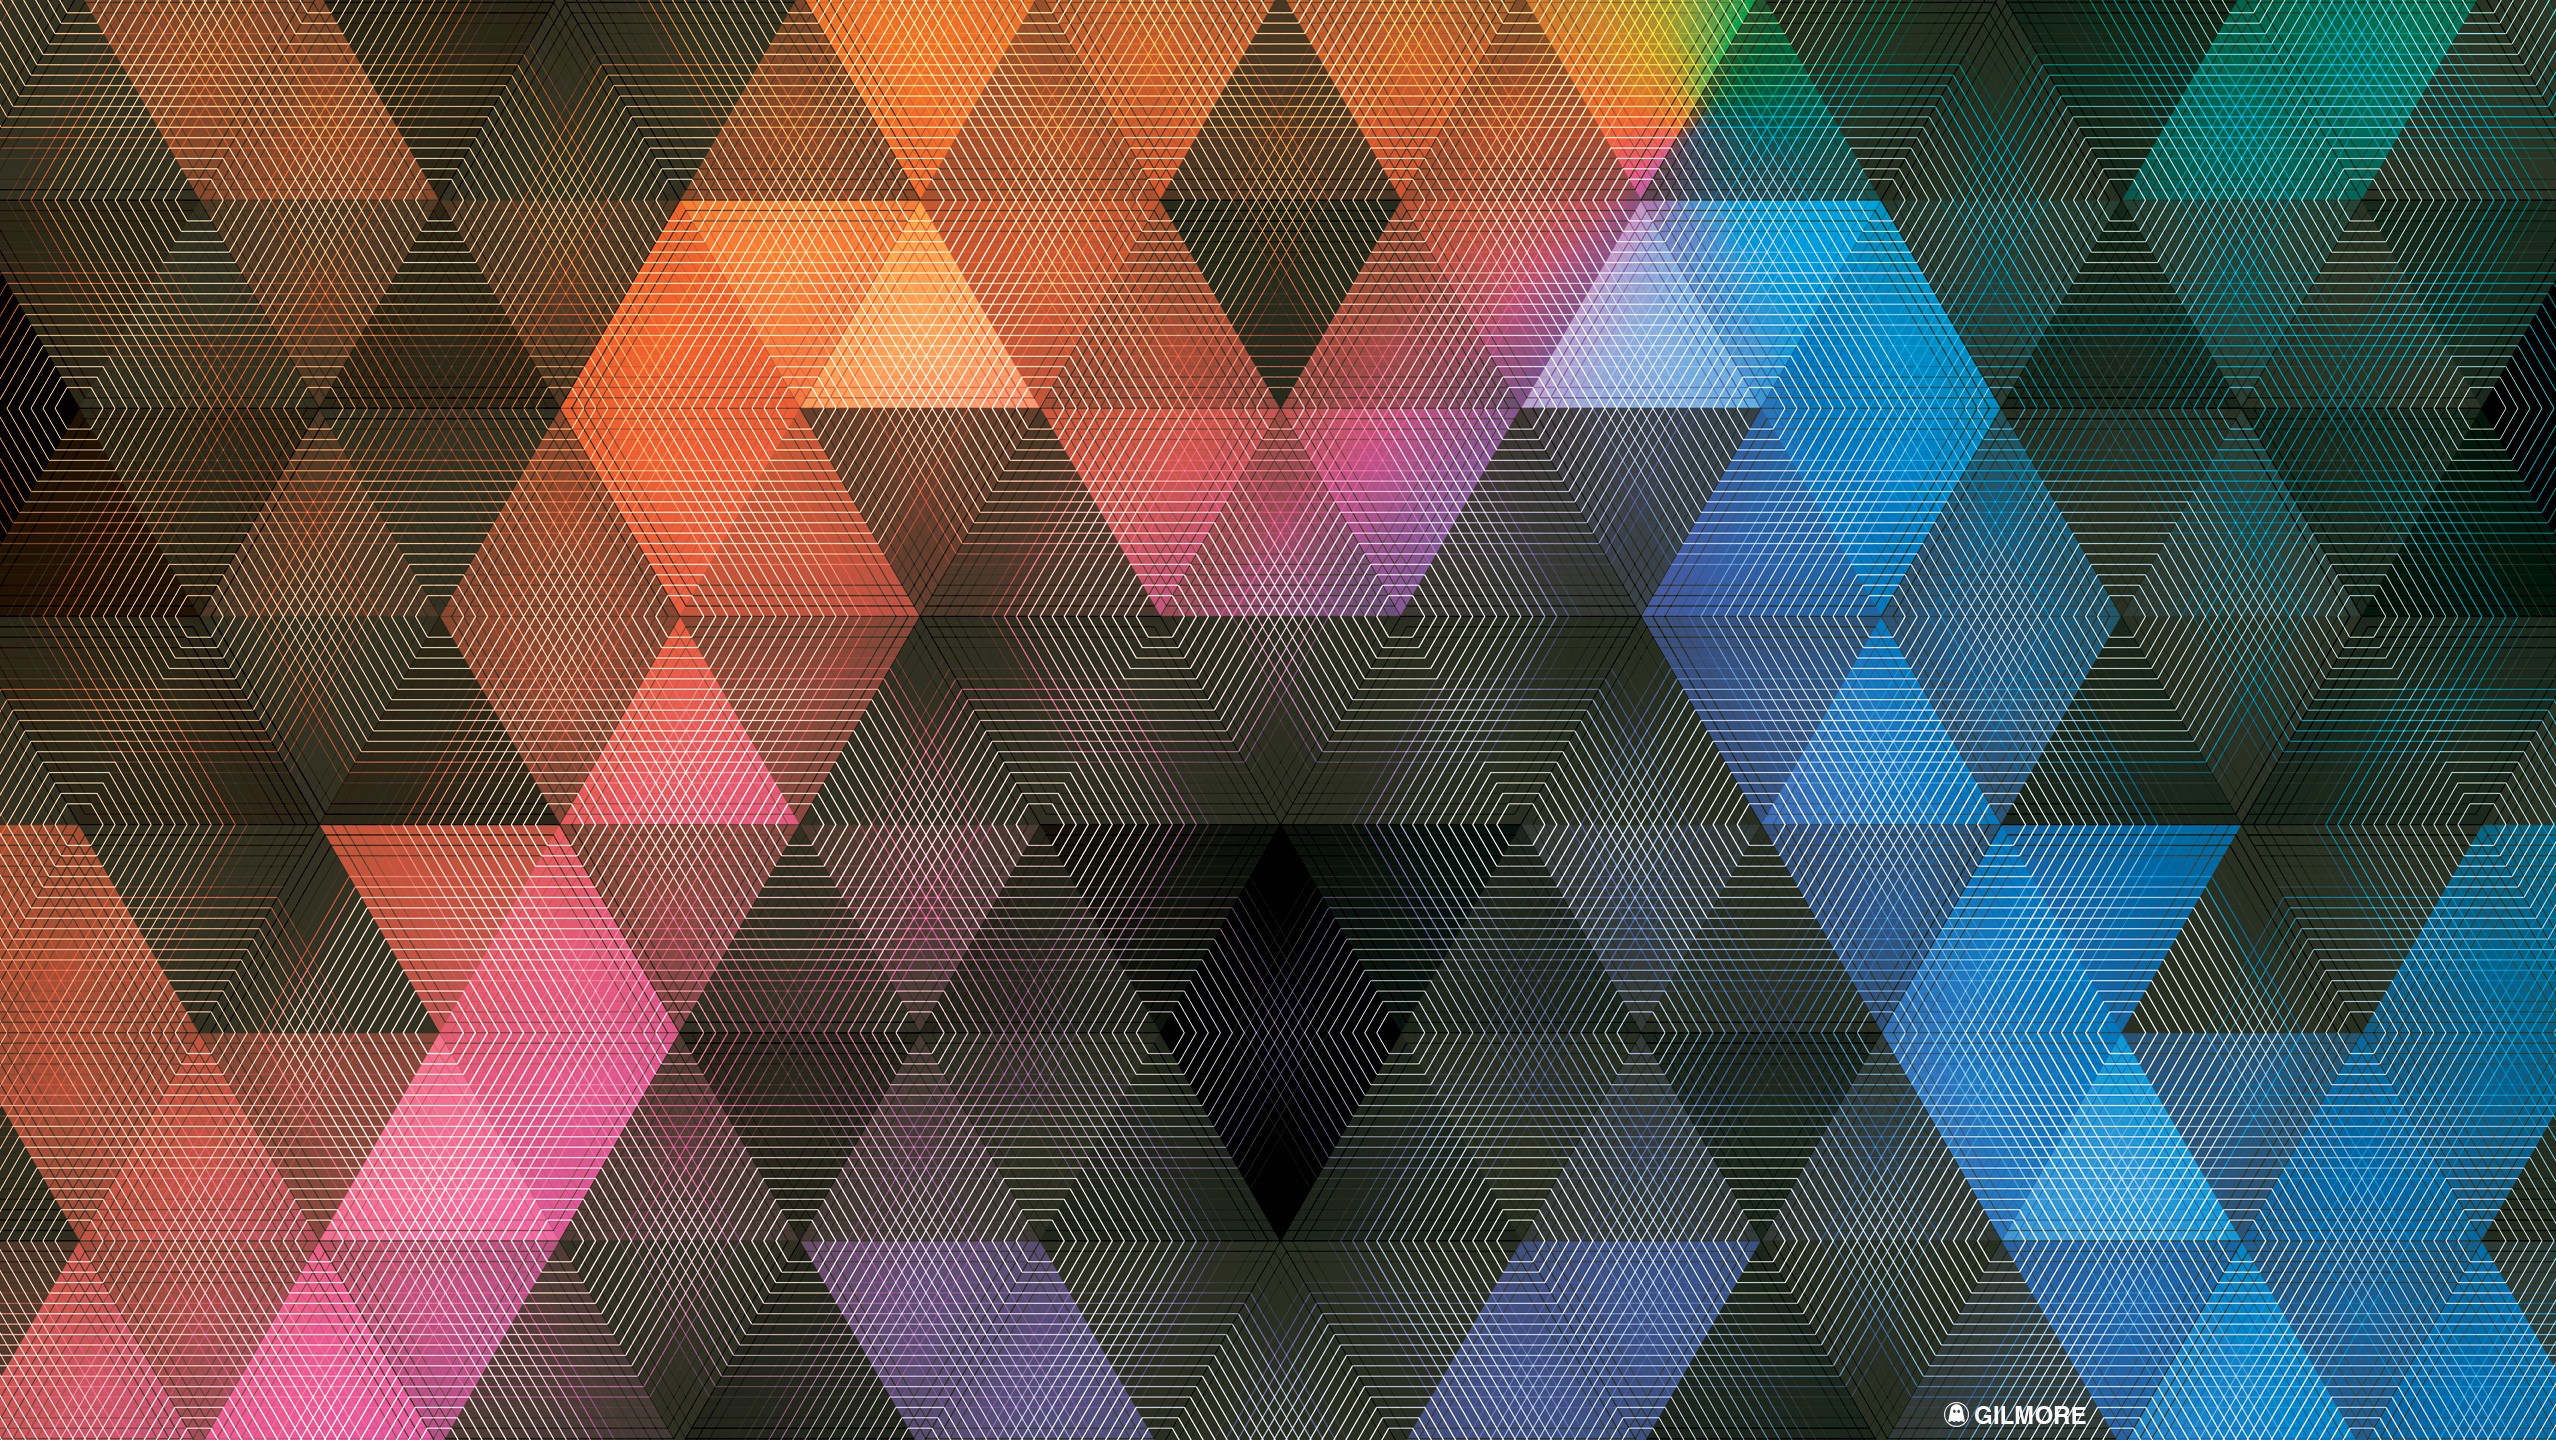 Abstract Pattern Andy Gilmore Geometry Andy Gilmore Pattern Geometry Abstract Colorful 2556x1440